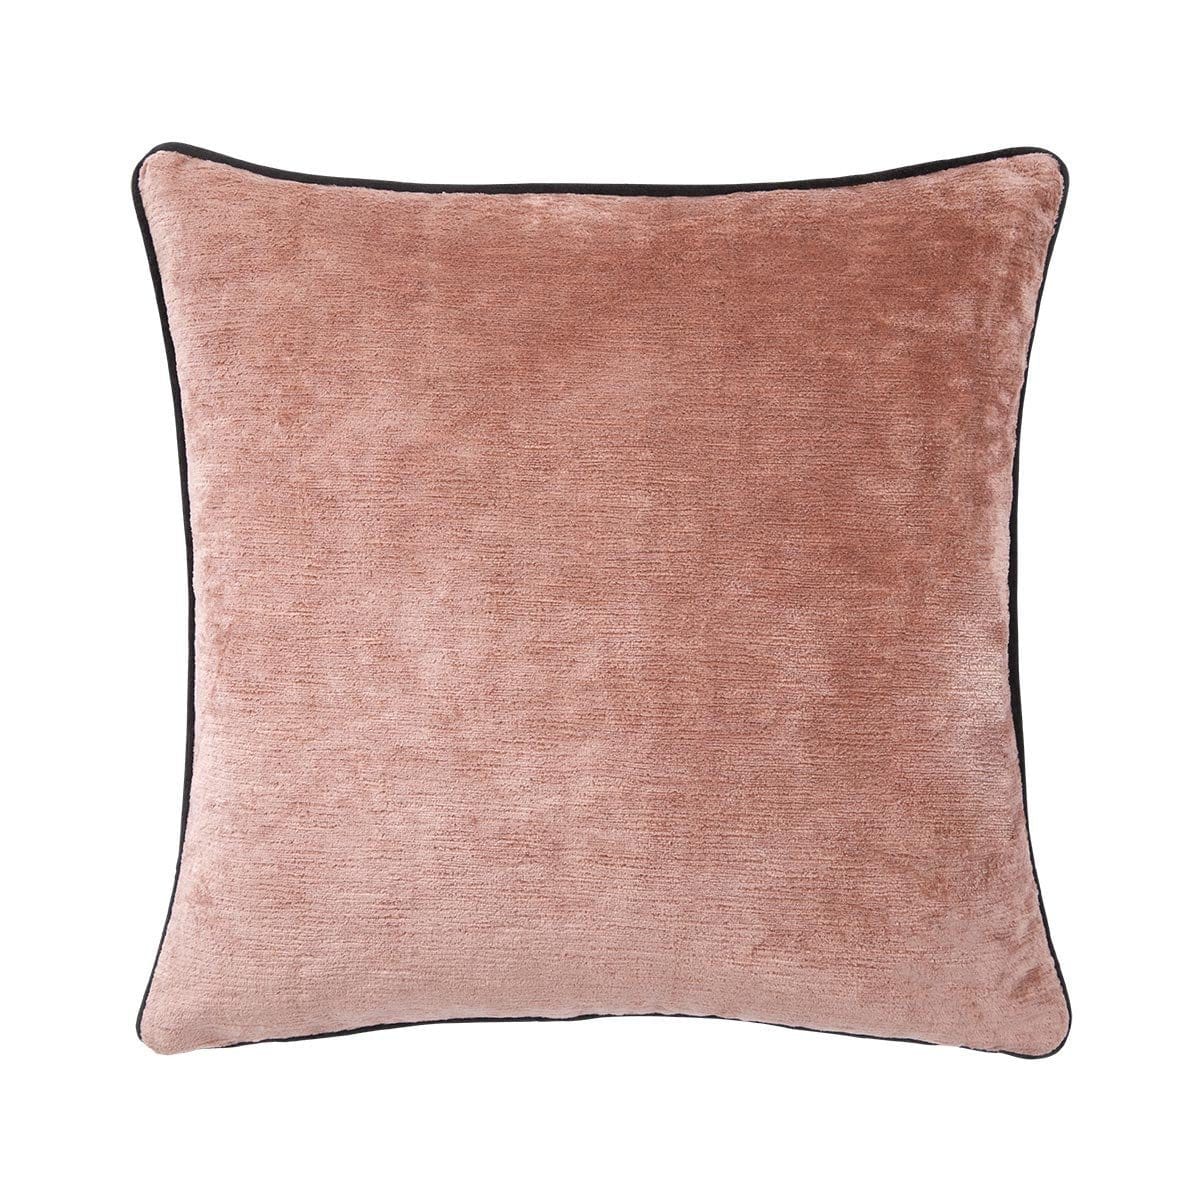 Decorative Pillows Iosis Boromée Decorative Pillow by Yves Delorme Cedre / 18 x 18 in Yves Delorme